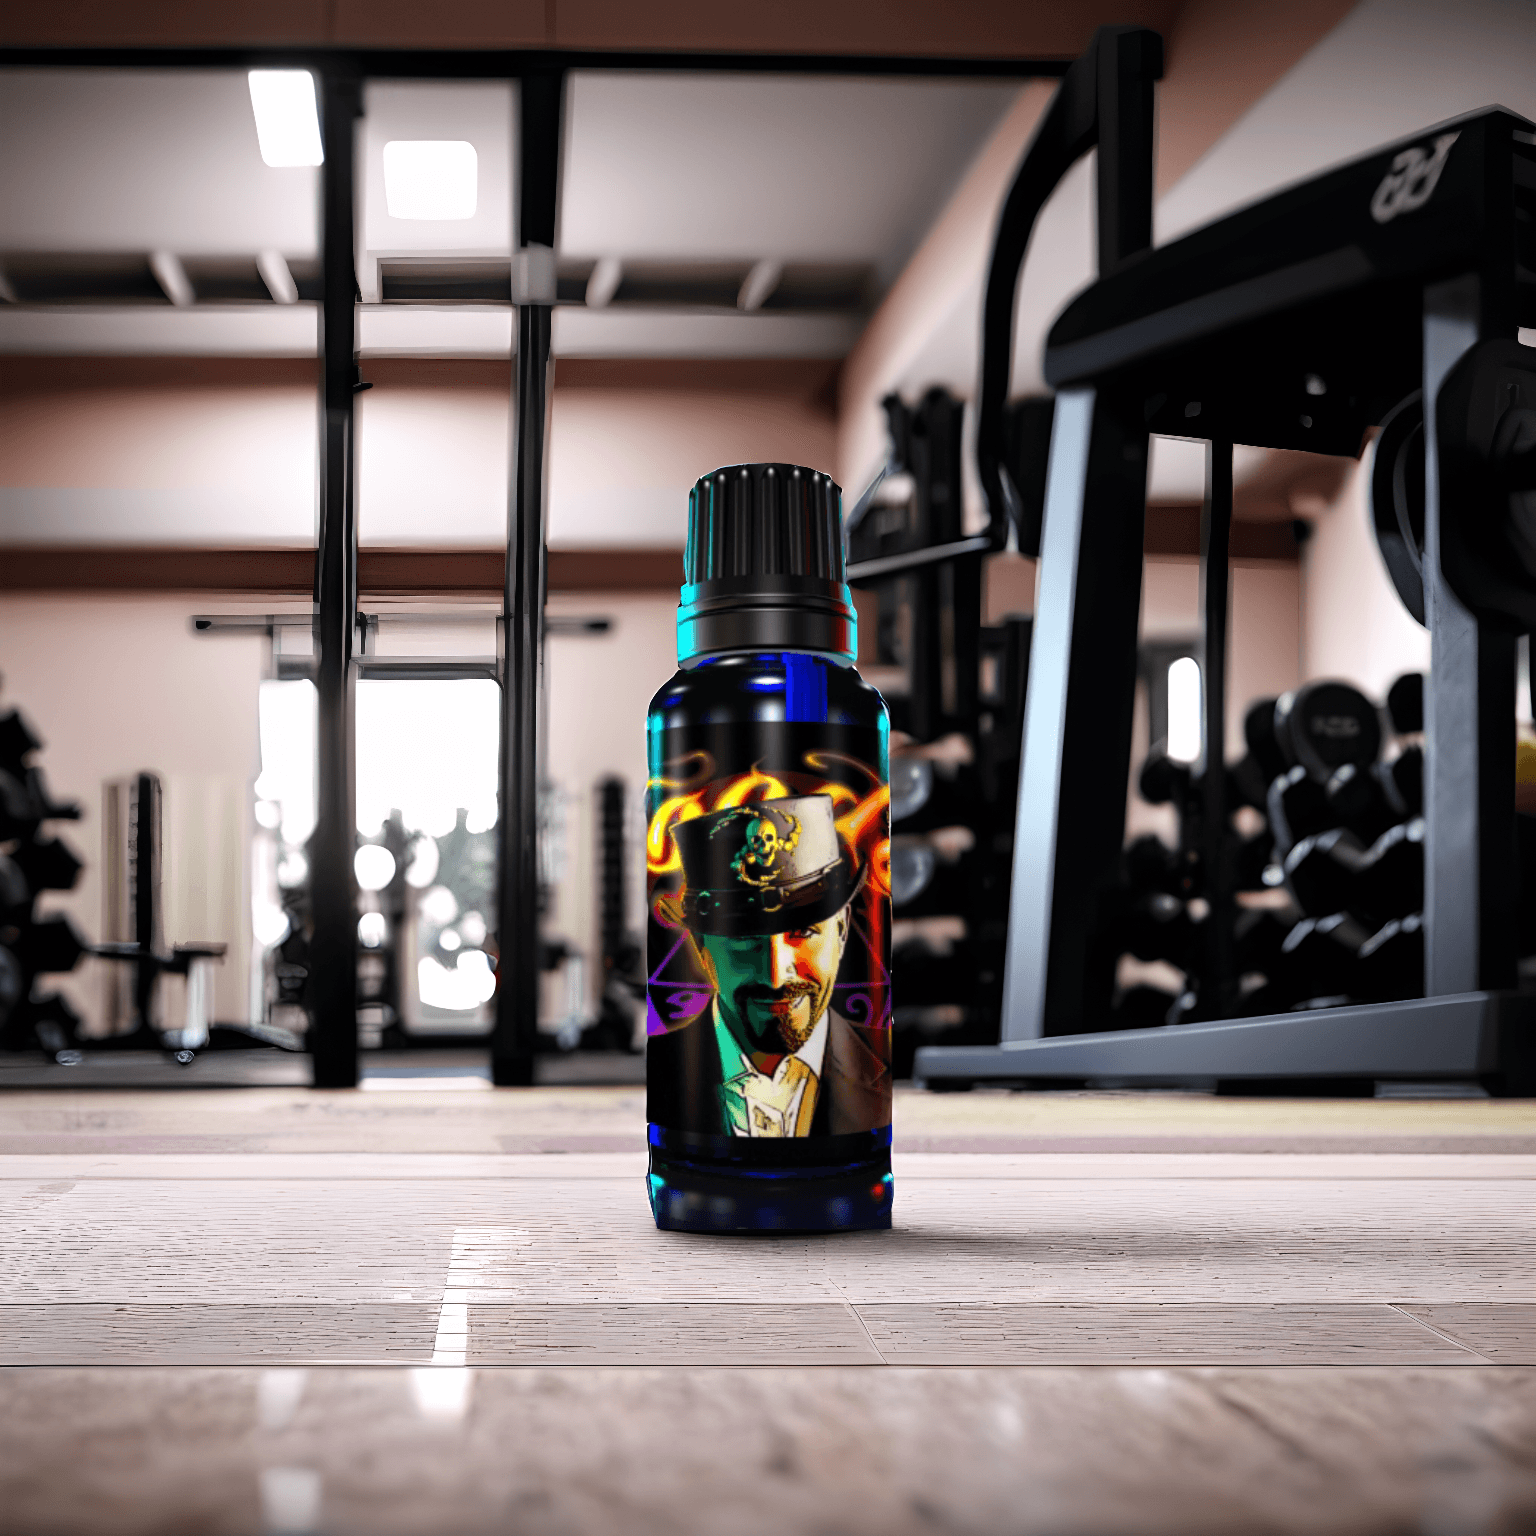 Voodoo Pheromone Cologne bottle placed on a gym floor, marketed by Royal Pheromones for enhancing attractiveness through Pheromone Oils and Colognes.